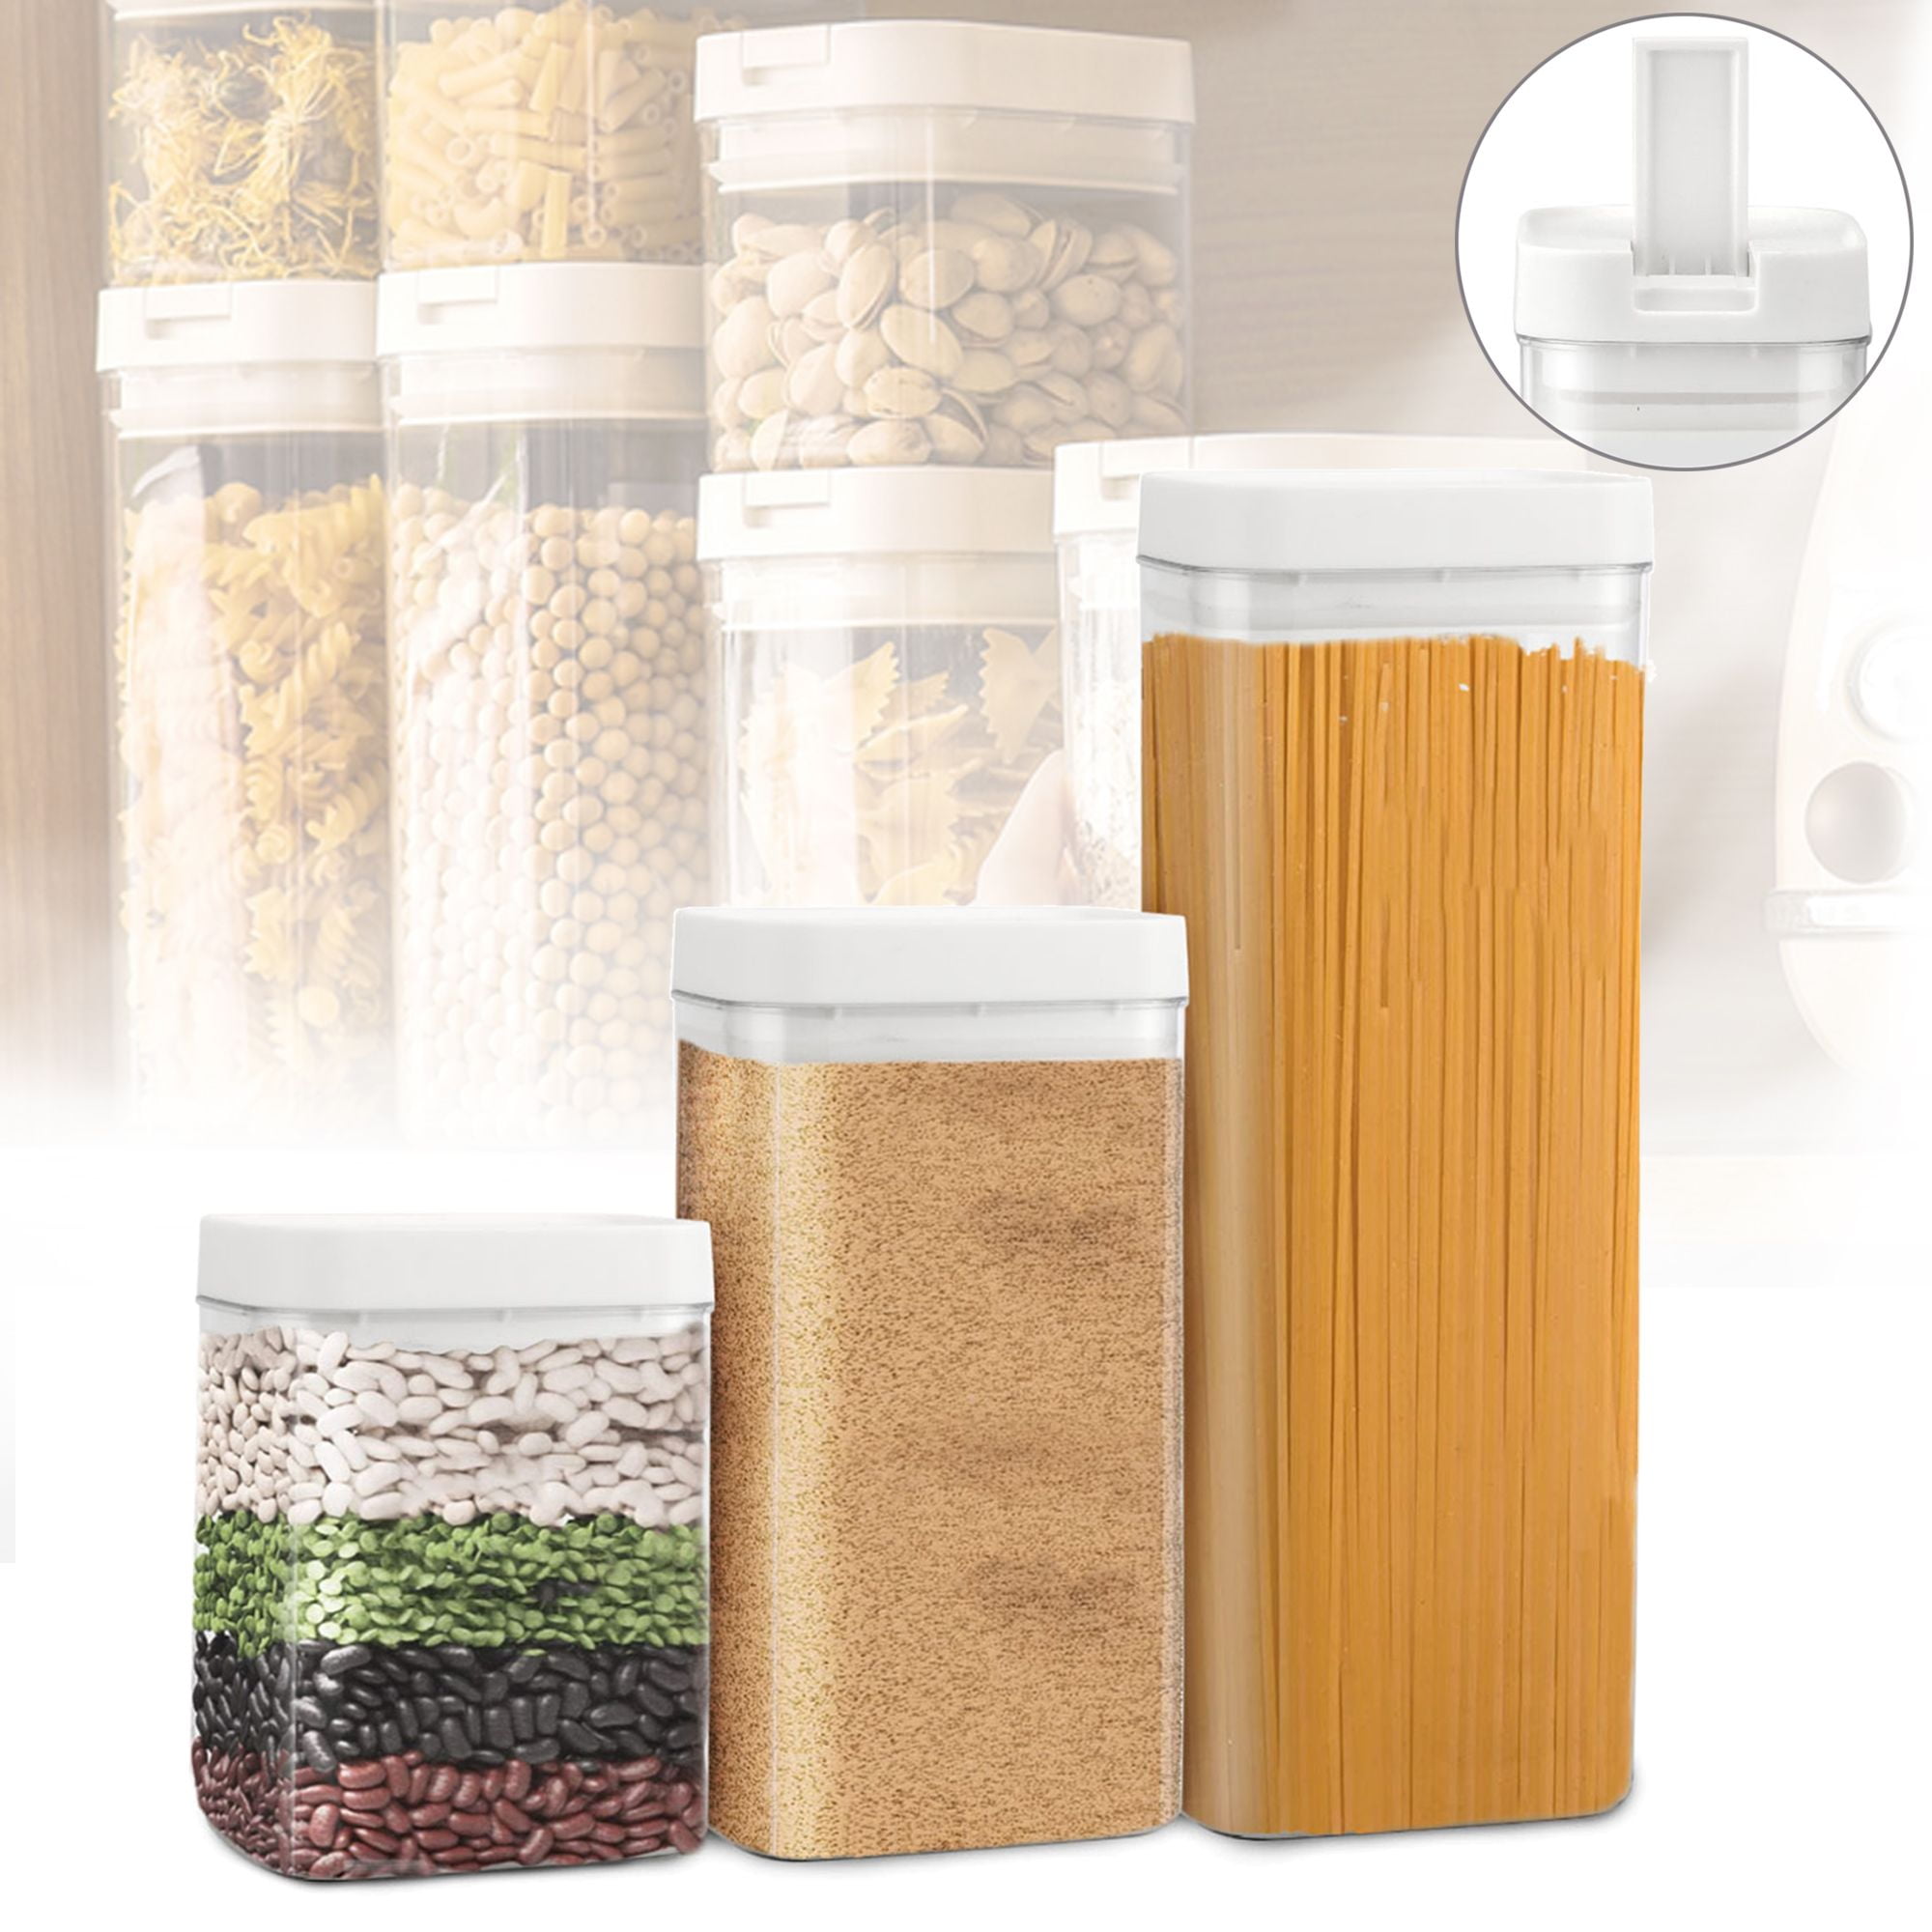 PANTRYSTAR Airtight Food Storage Containers With Lids, 7 PCS BPA Free  Kitchen Storage Containers for Spaghetti, Pasta, Dry Food,Flour and Sugar